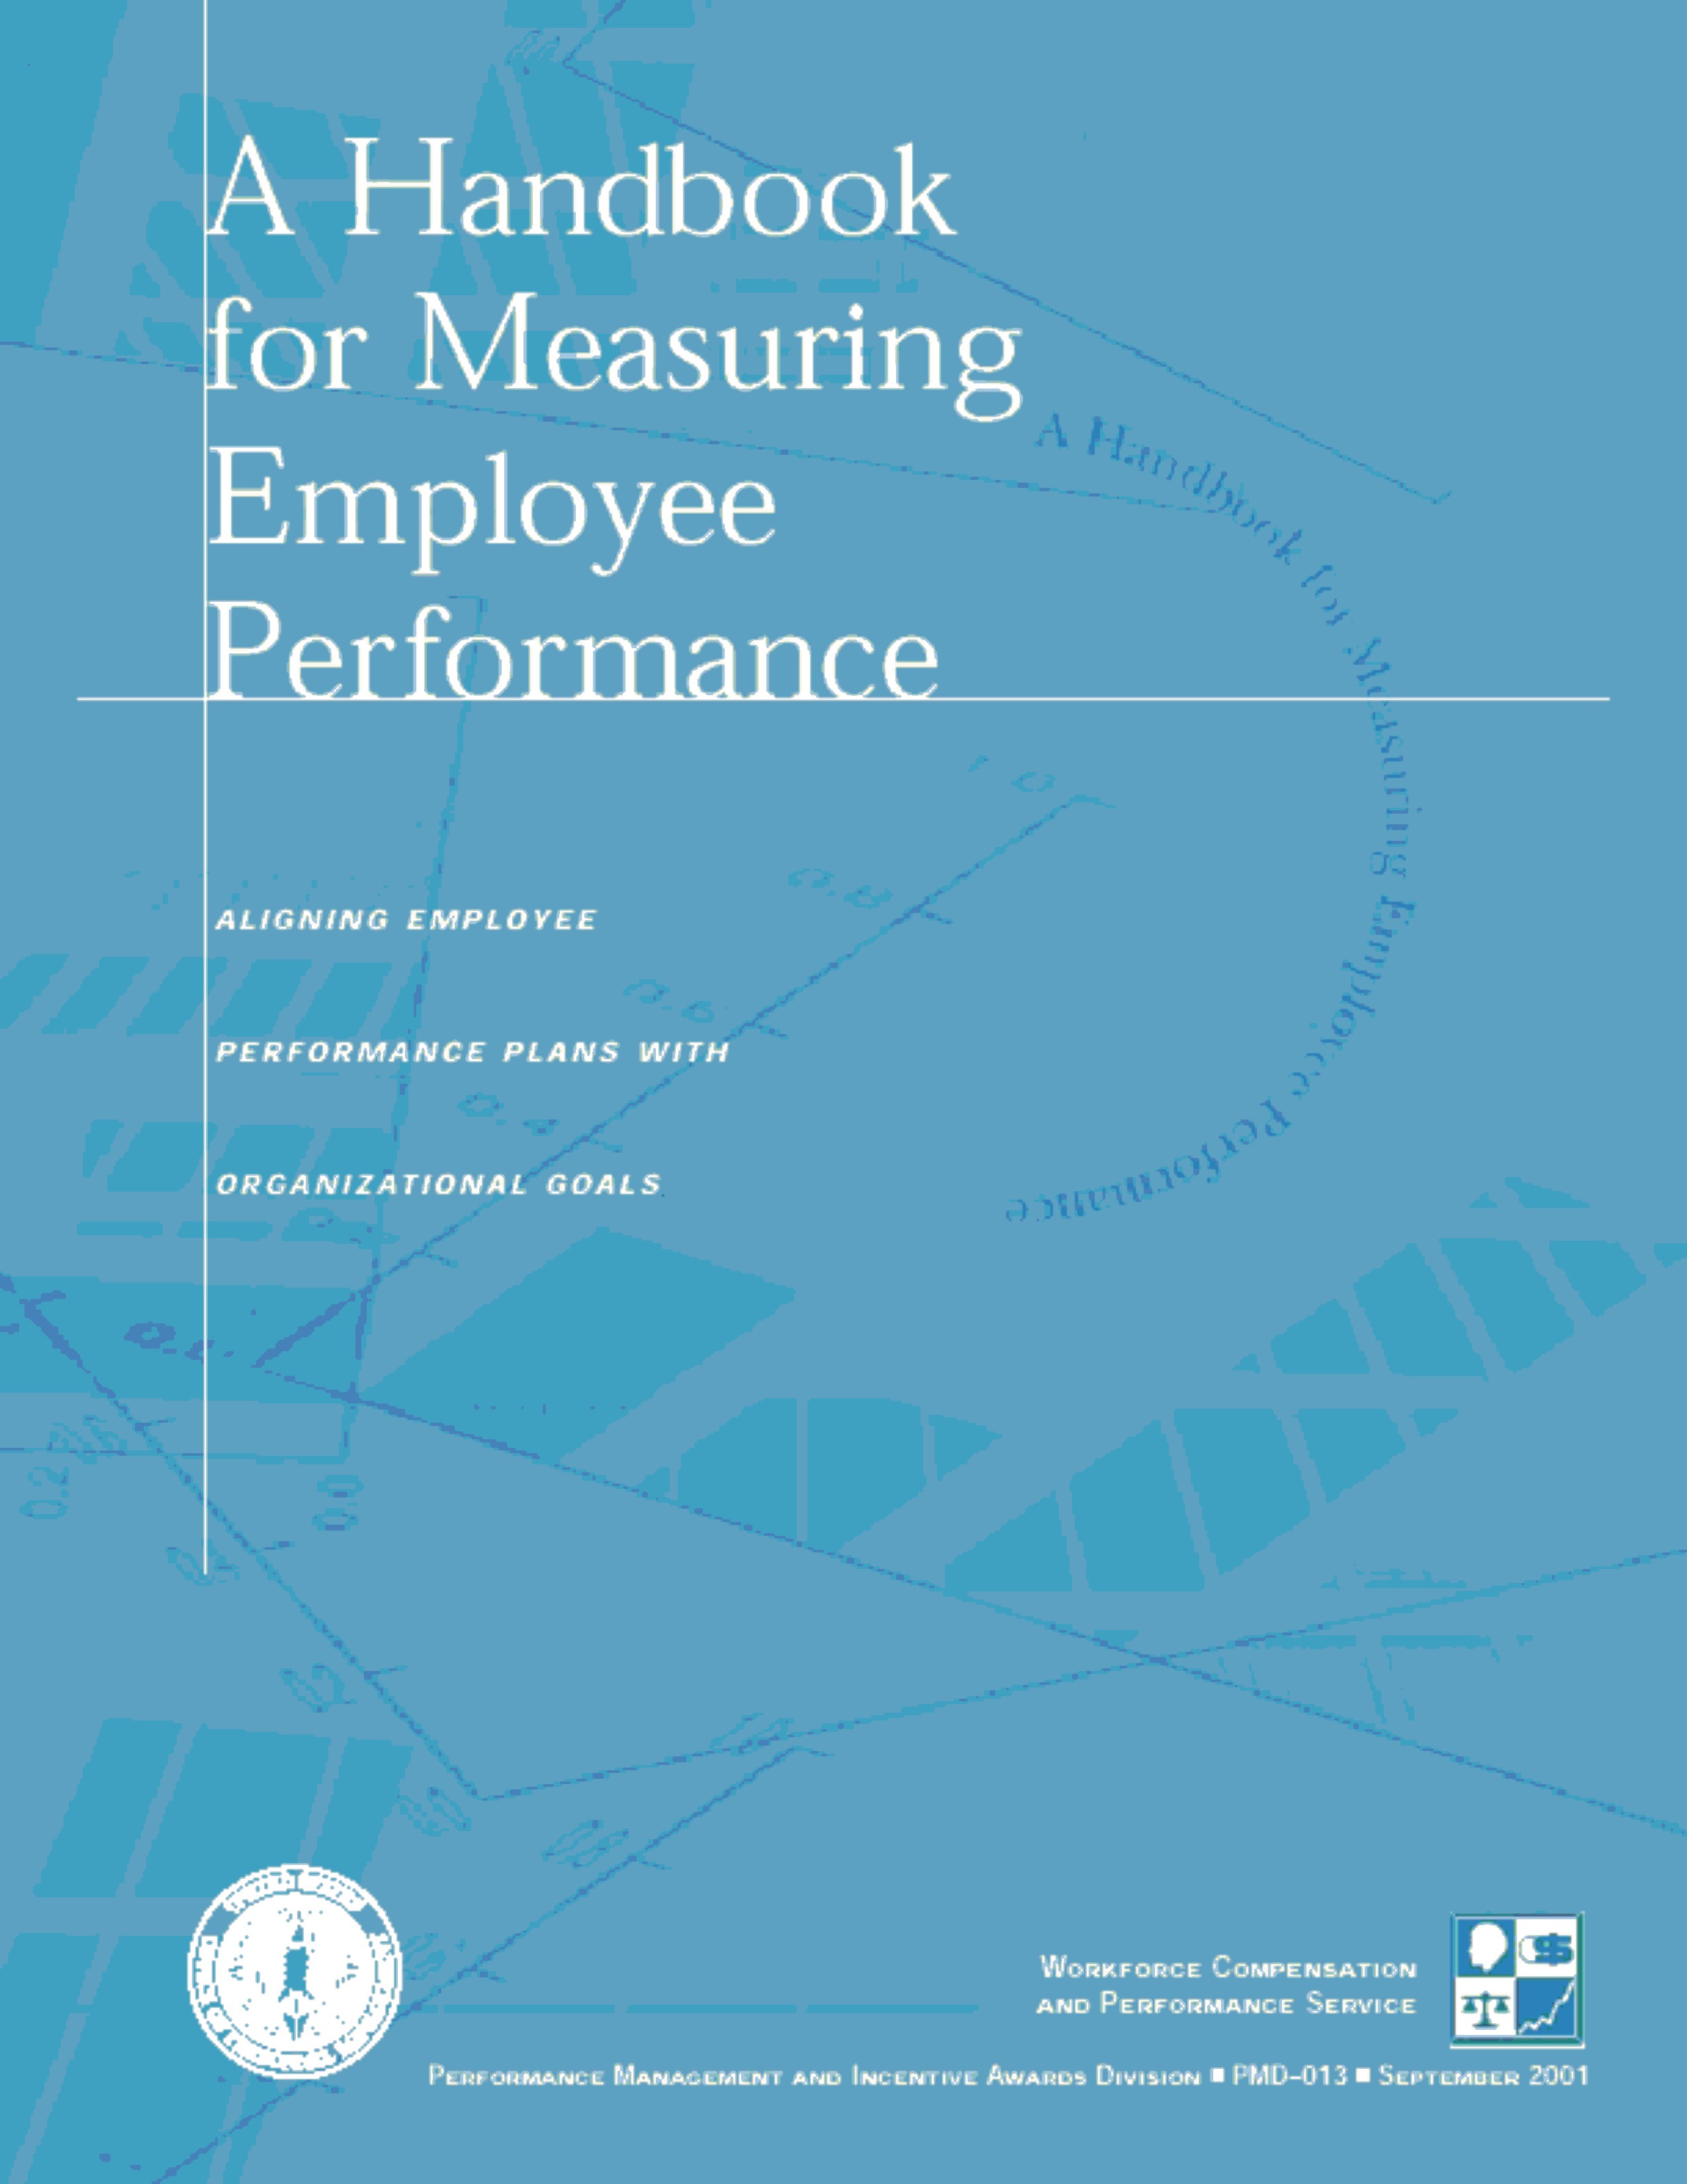 Click here to link to Measurement Handbook, PDF file 1.7MB